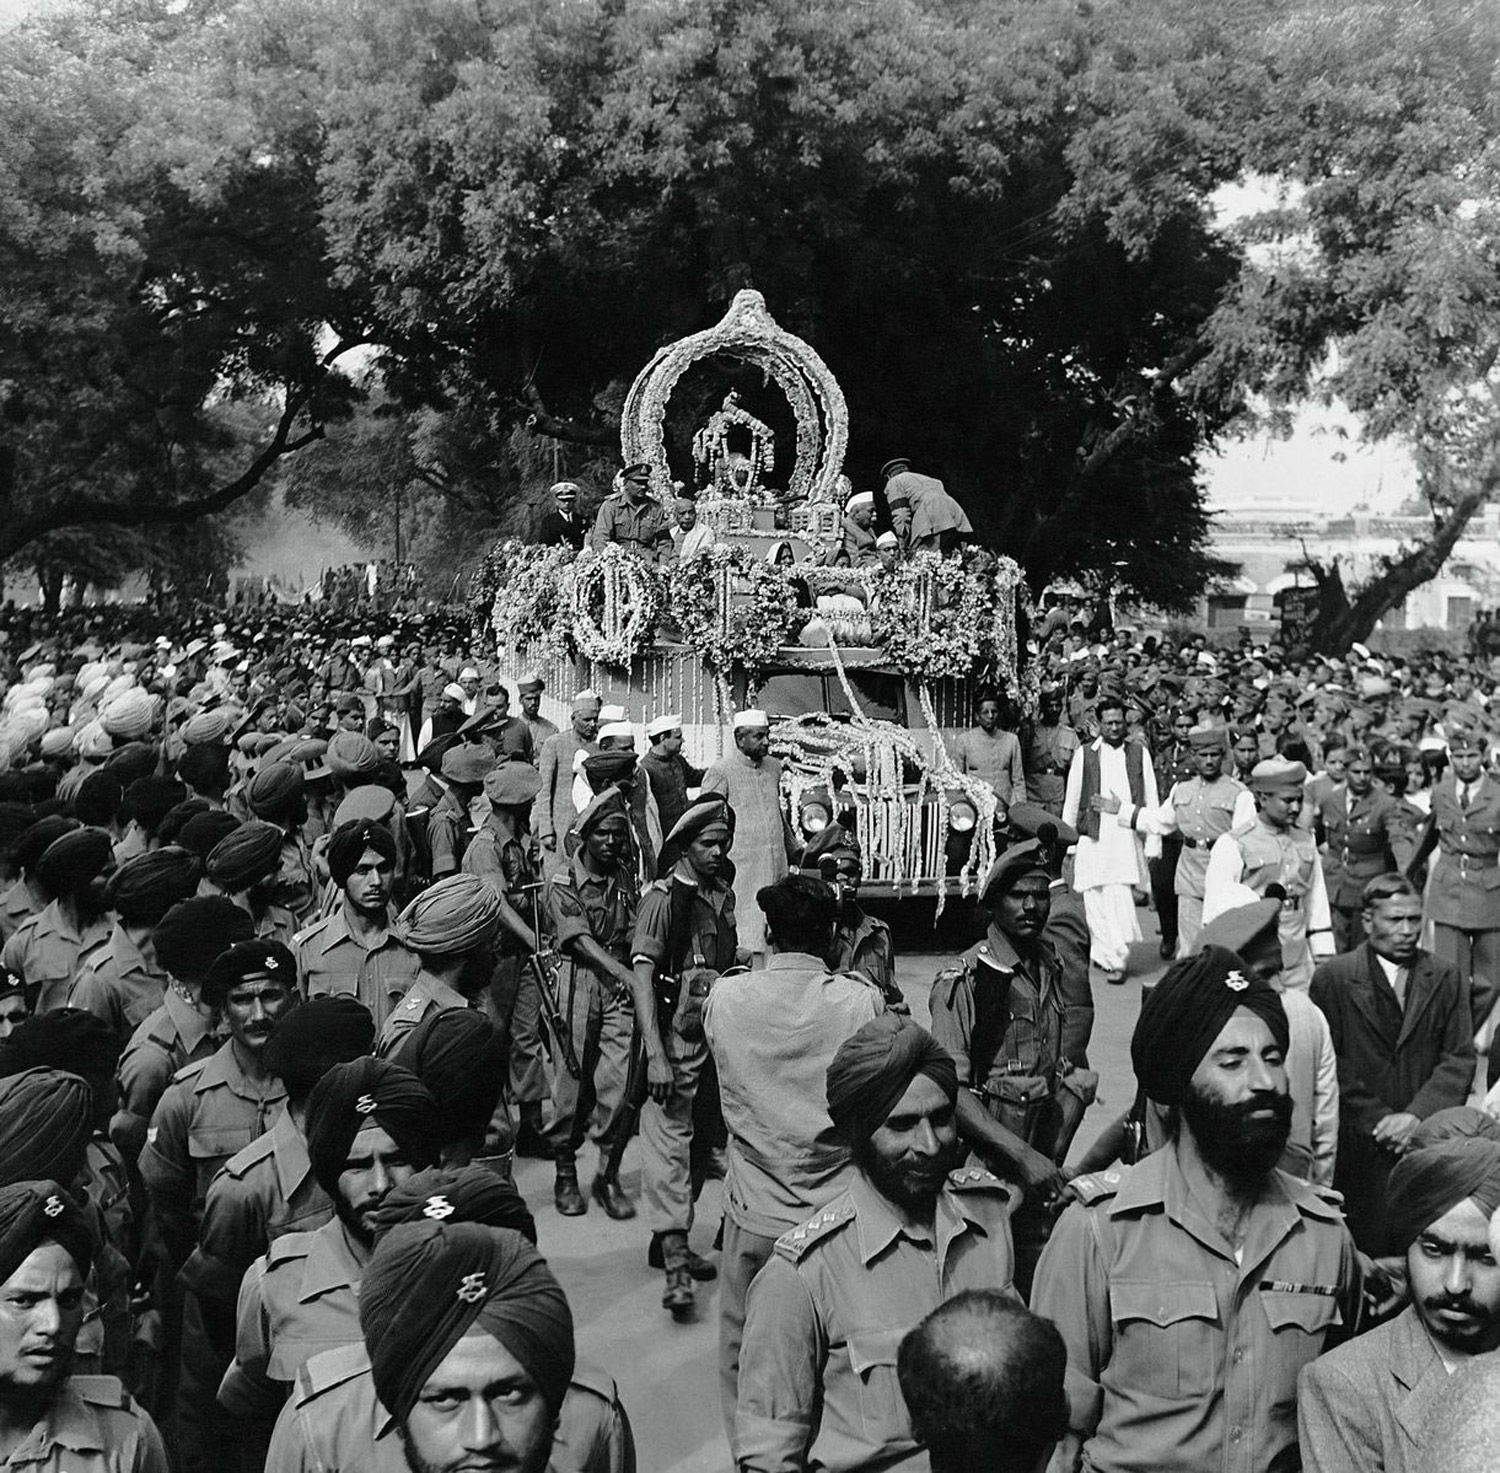 The ashes of Mahatma Gandhi being carried in a procession in Allahabad, Feb. 1948